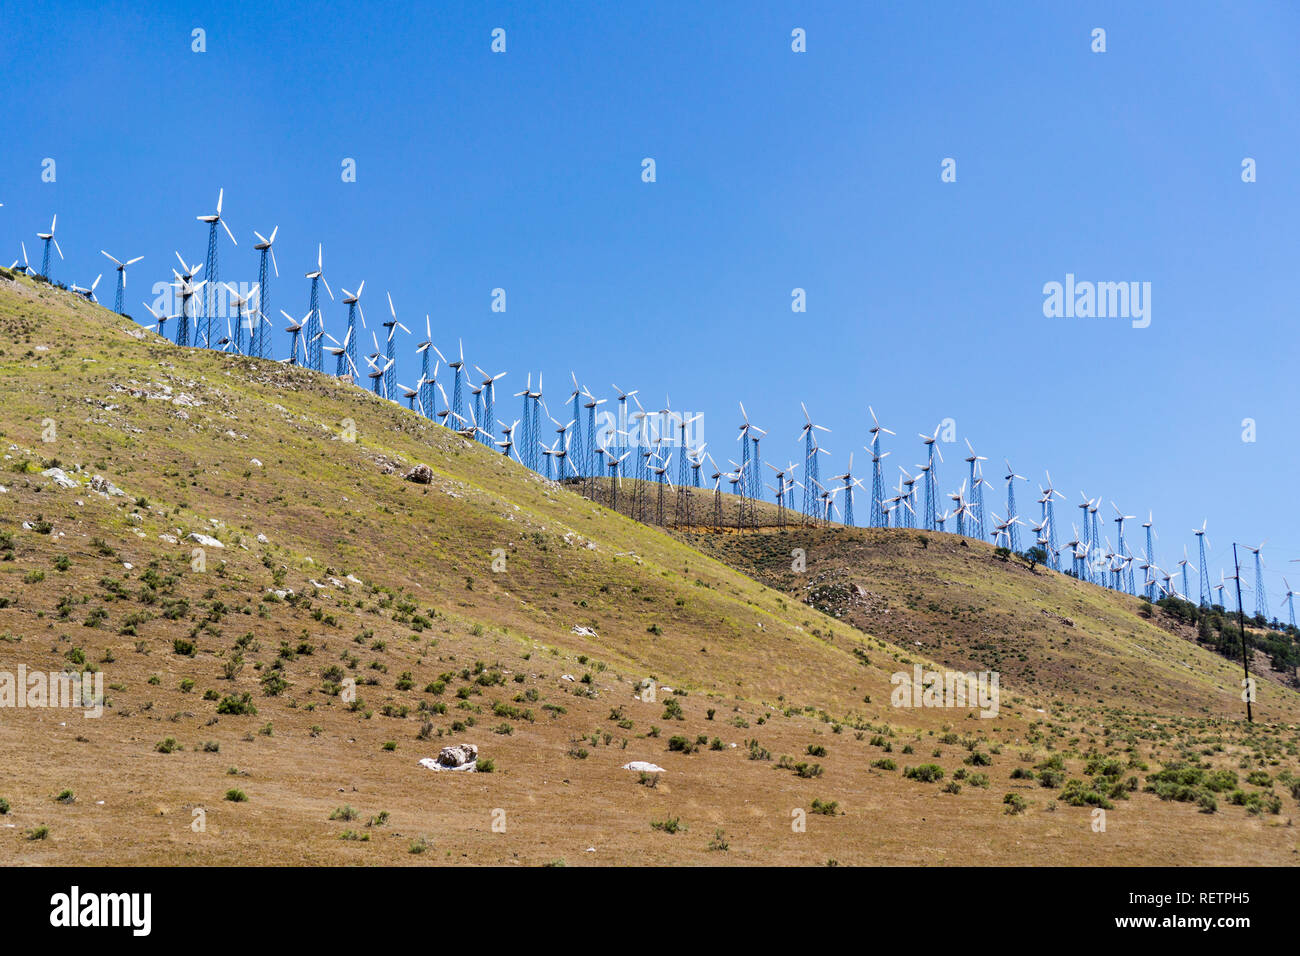 Many old and small Wind turbines on the top of golden hills in Kern county, south California Stock Photo